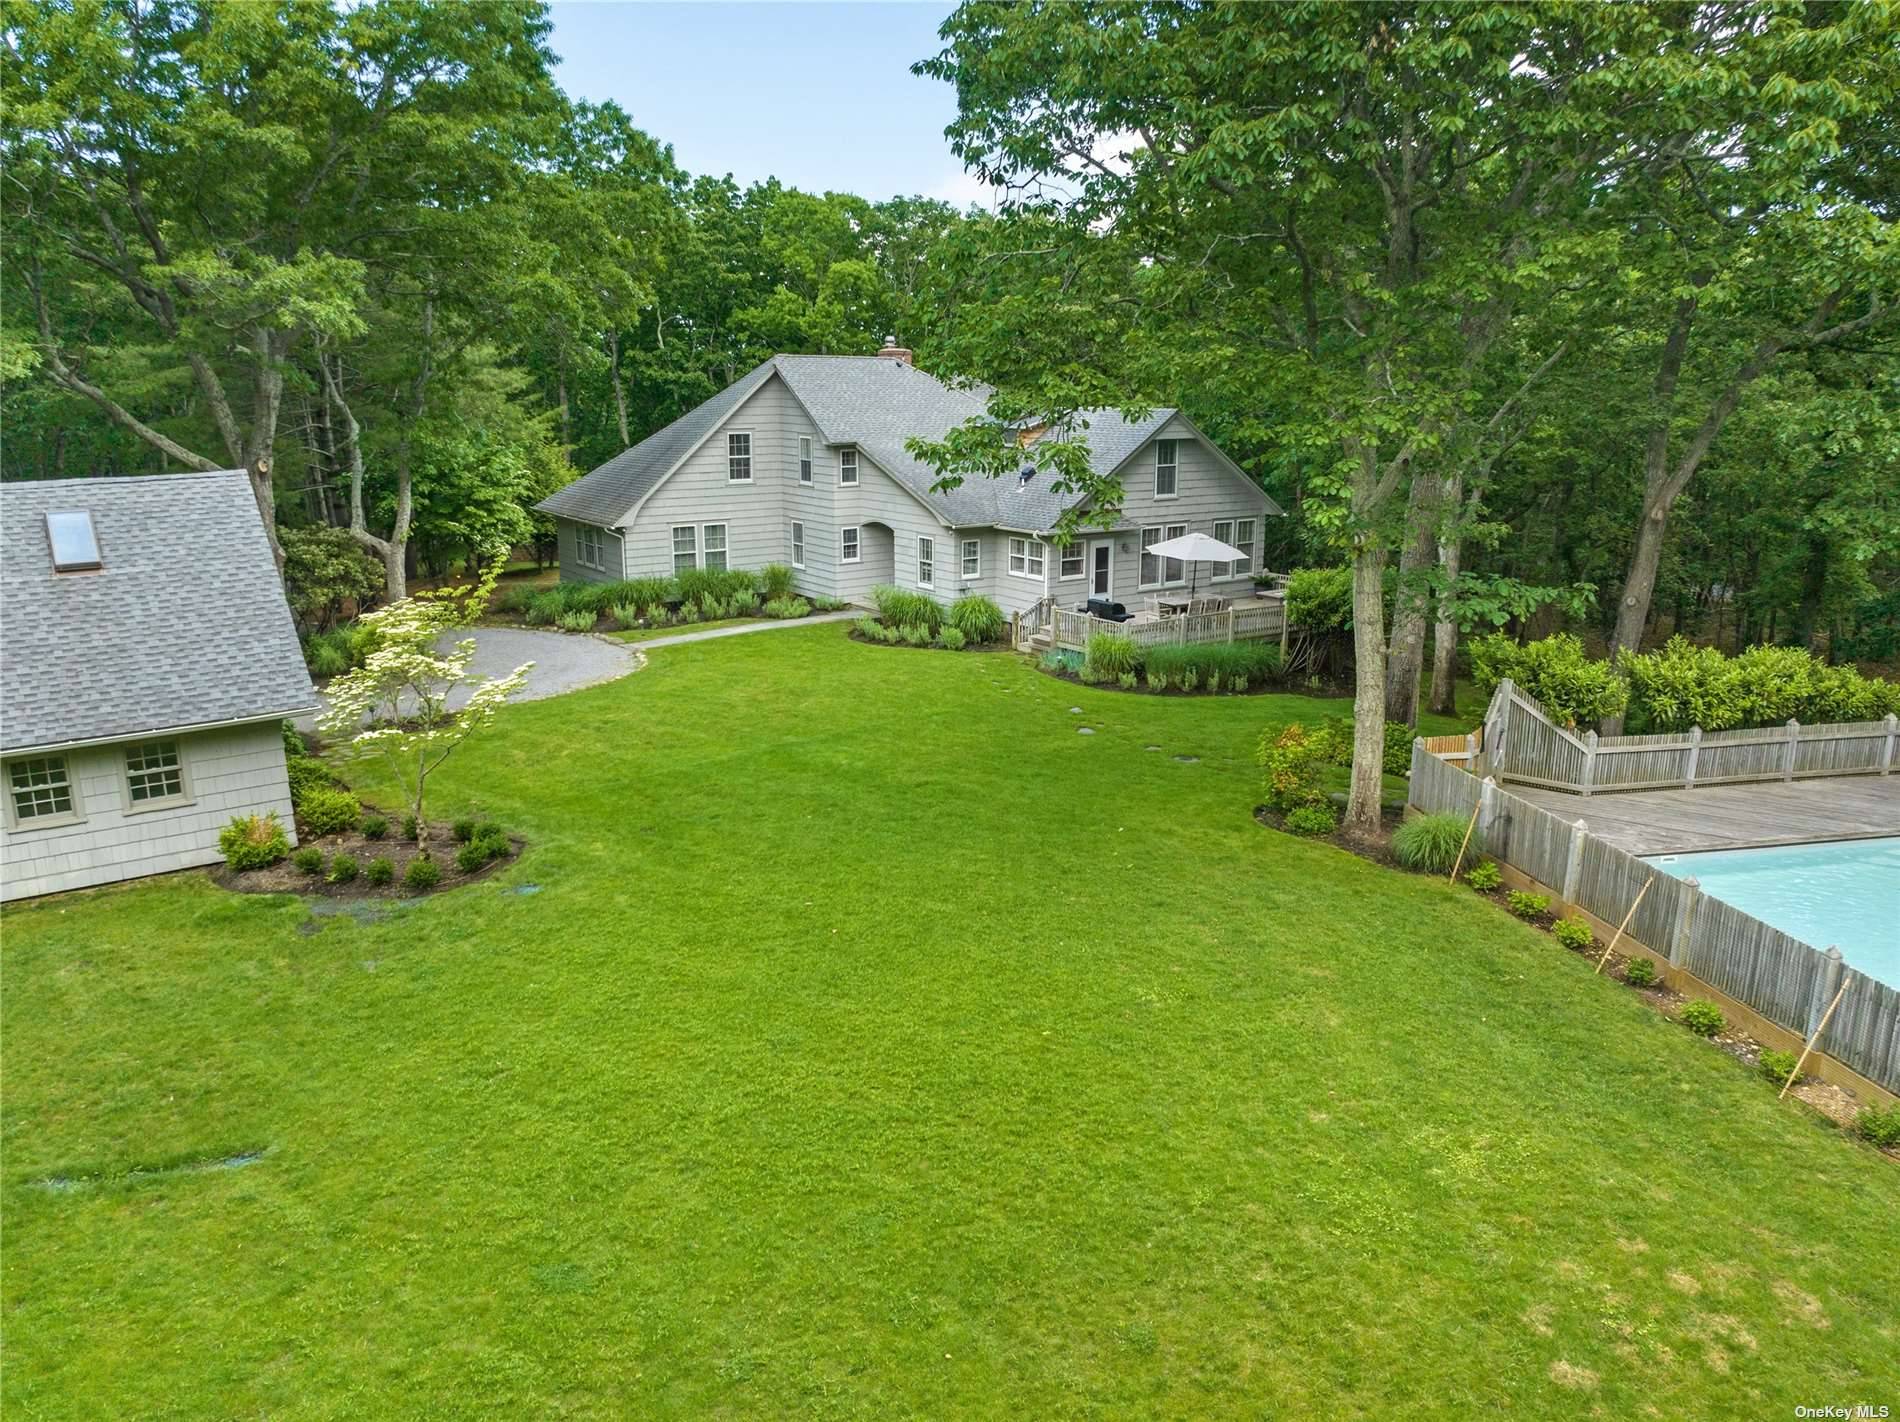 Arrive via a long private drive to this completely private country residence, minutes to the charming Village of Sag Harbor and blocks to local markets and stunning beach.